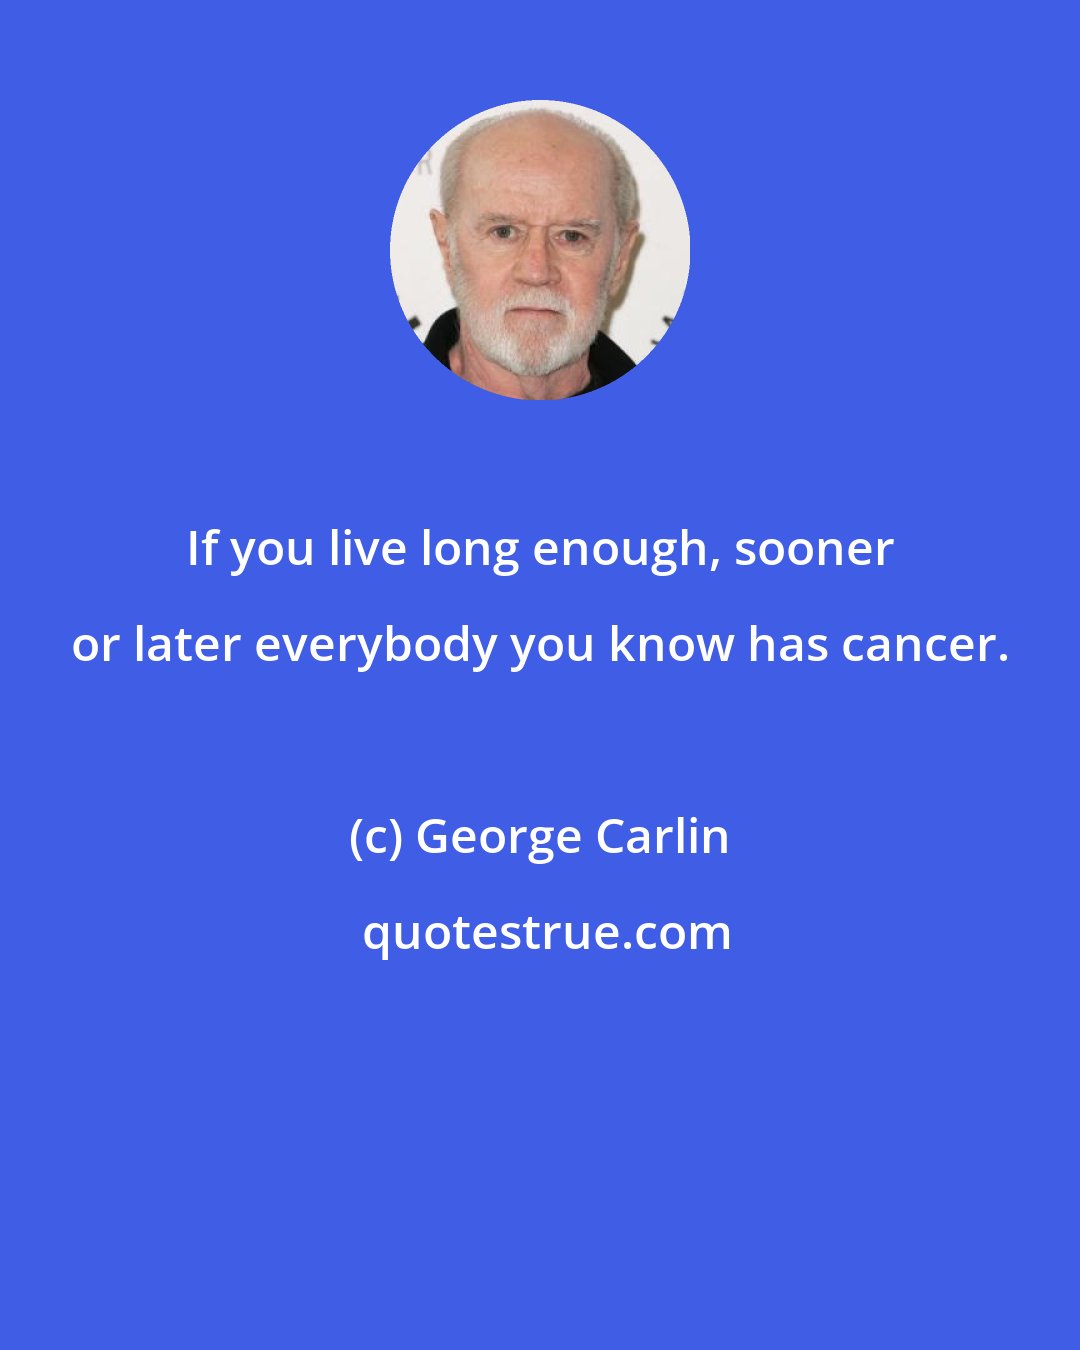 George Carlin: If you live long enough, sooner or later everybody you know has cancer.